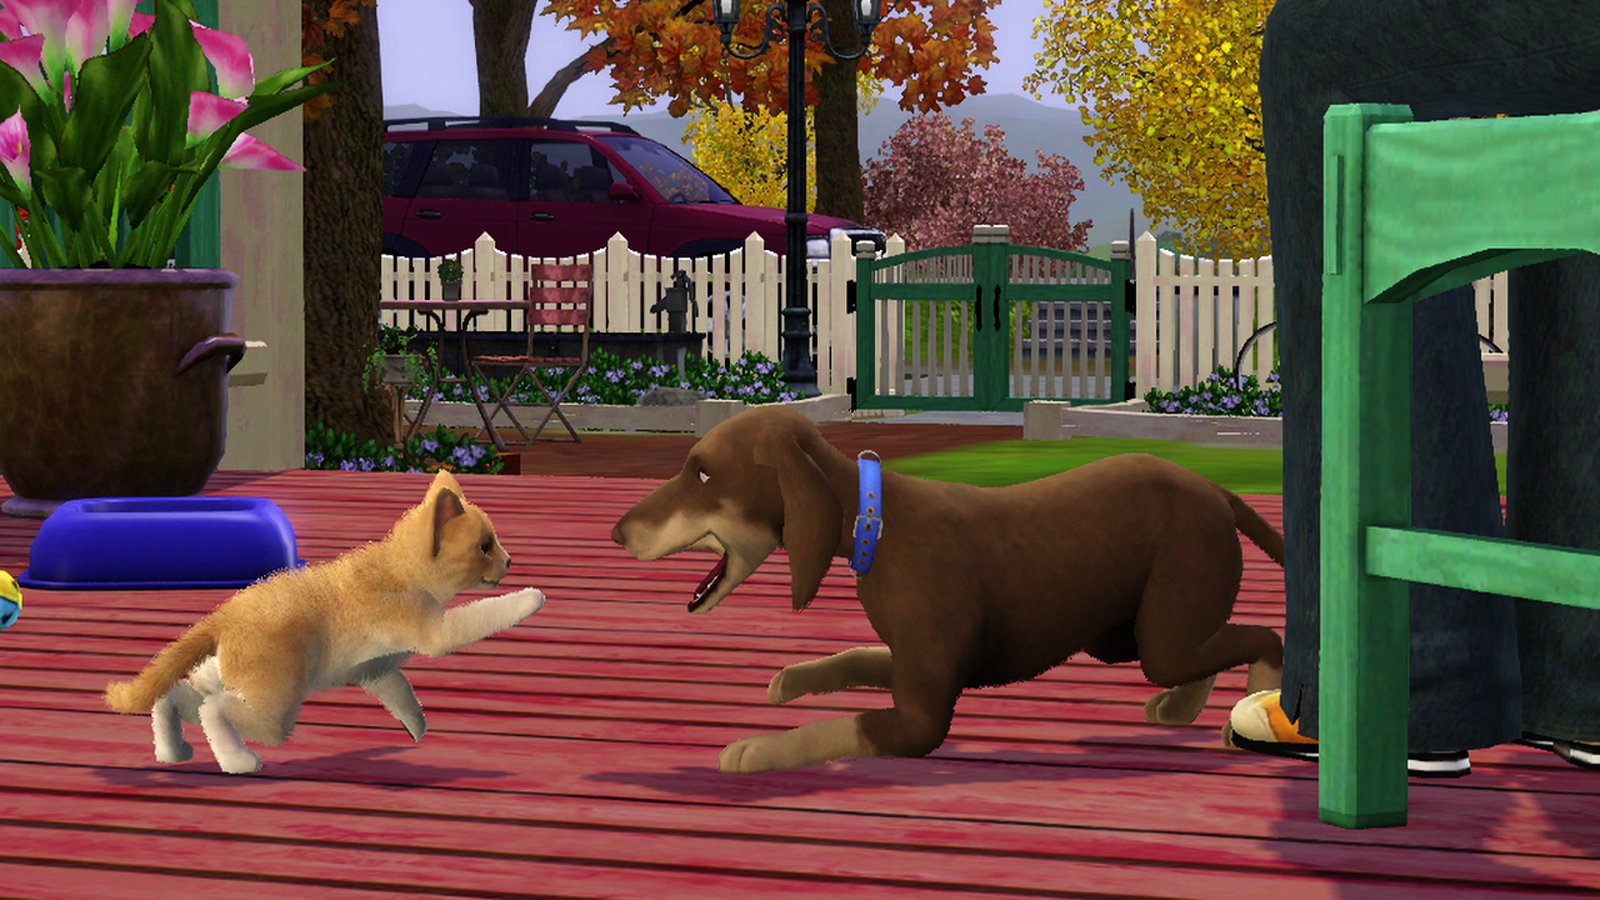 The Sims 3: Pets Expansion Pack